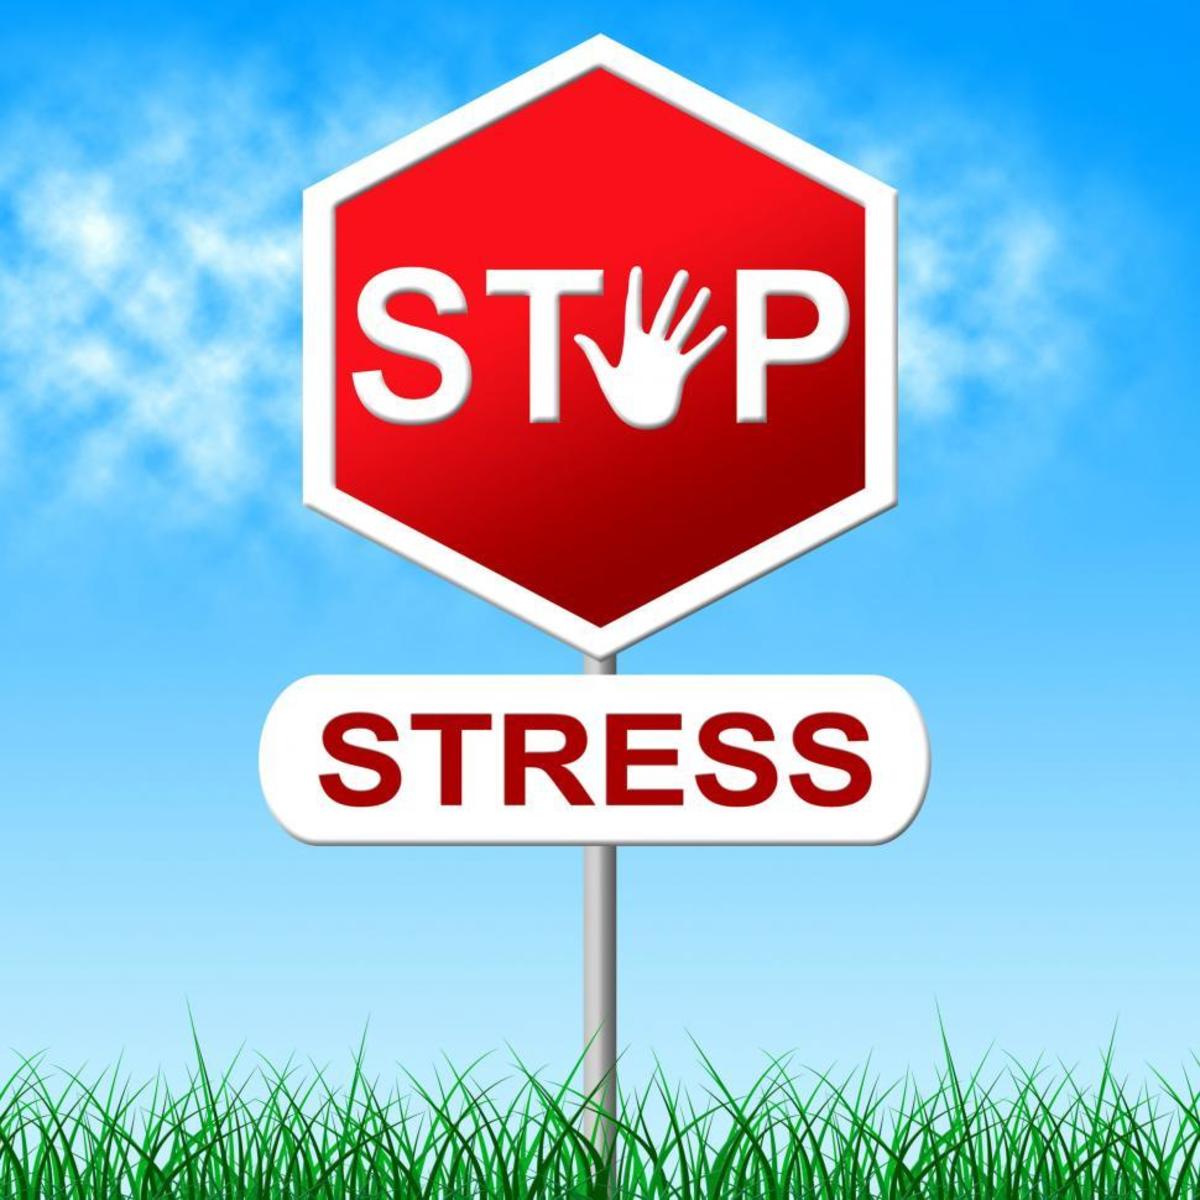 the-six-leading-causes-of-death-can-be-attributed-to-stress